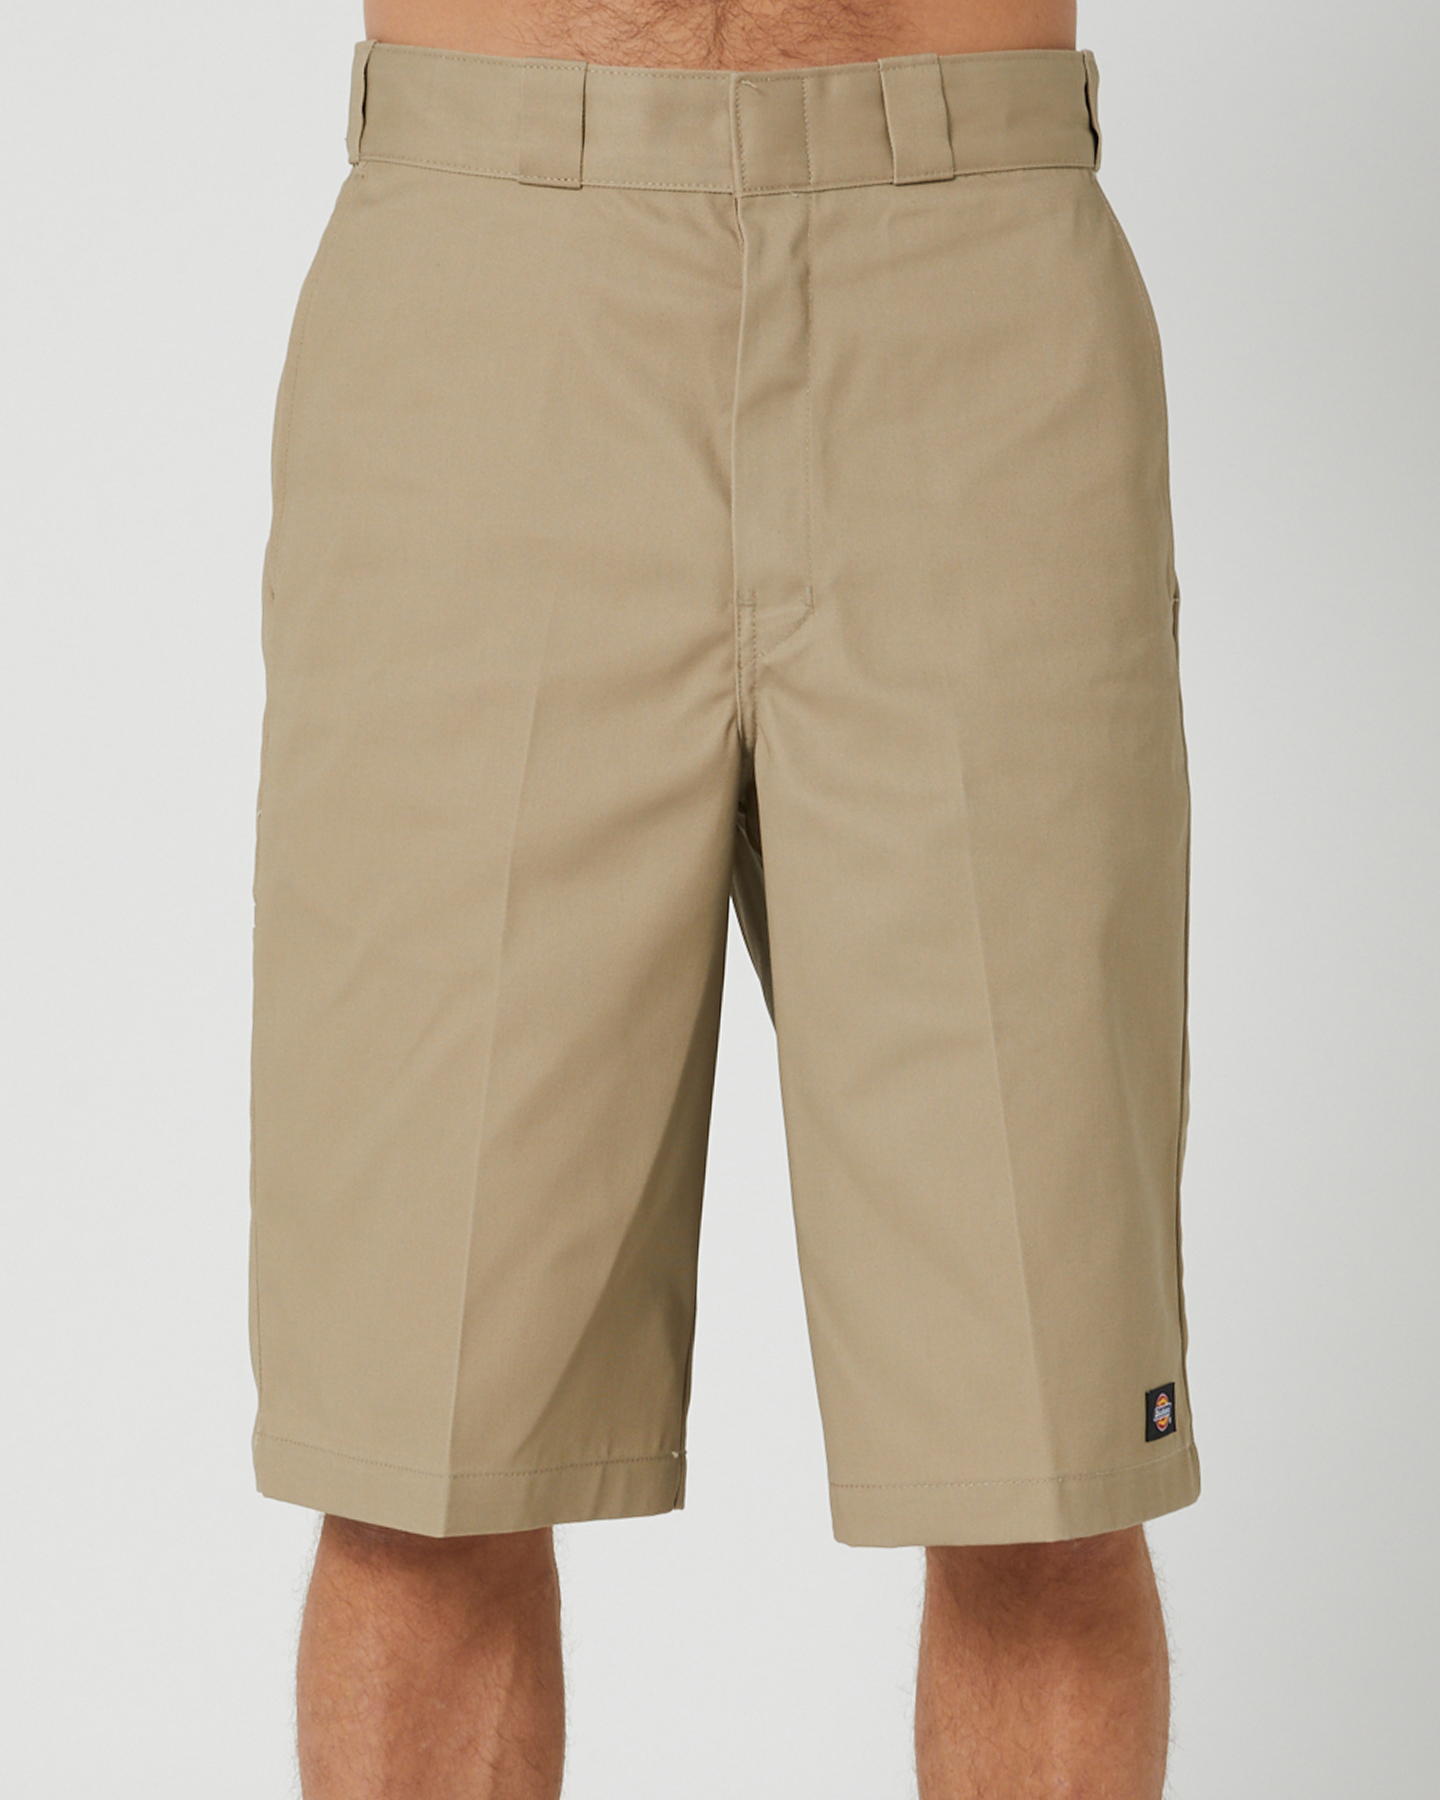 Women's Shorts - Work and Casual Shorts, Dickies Canada